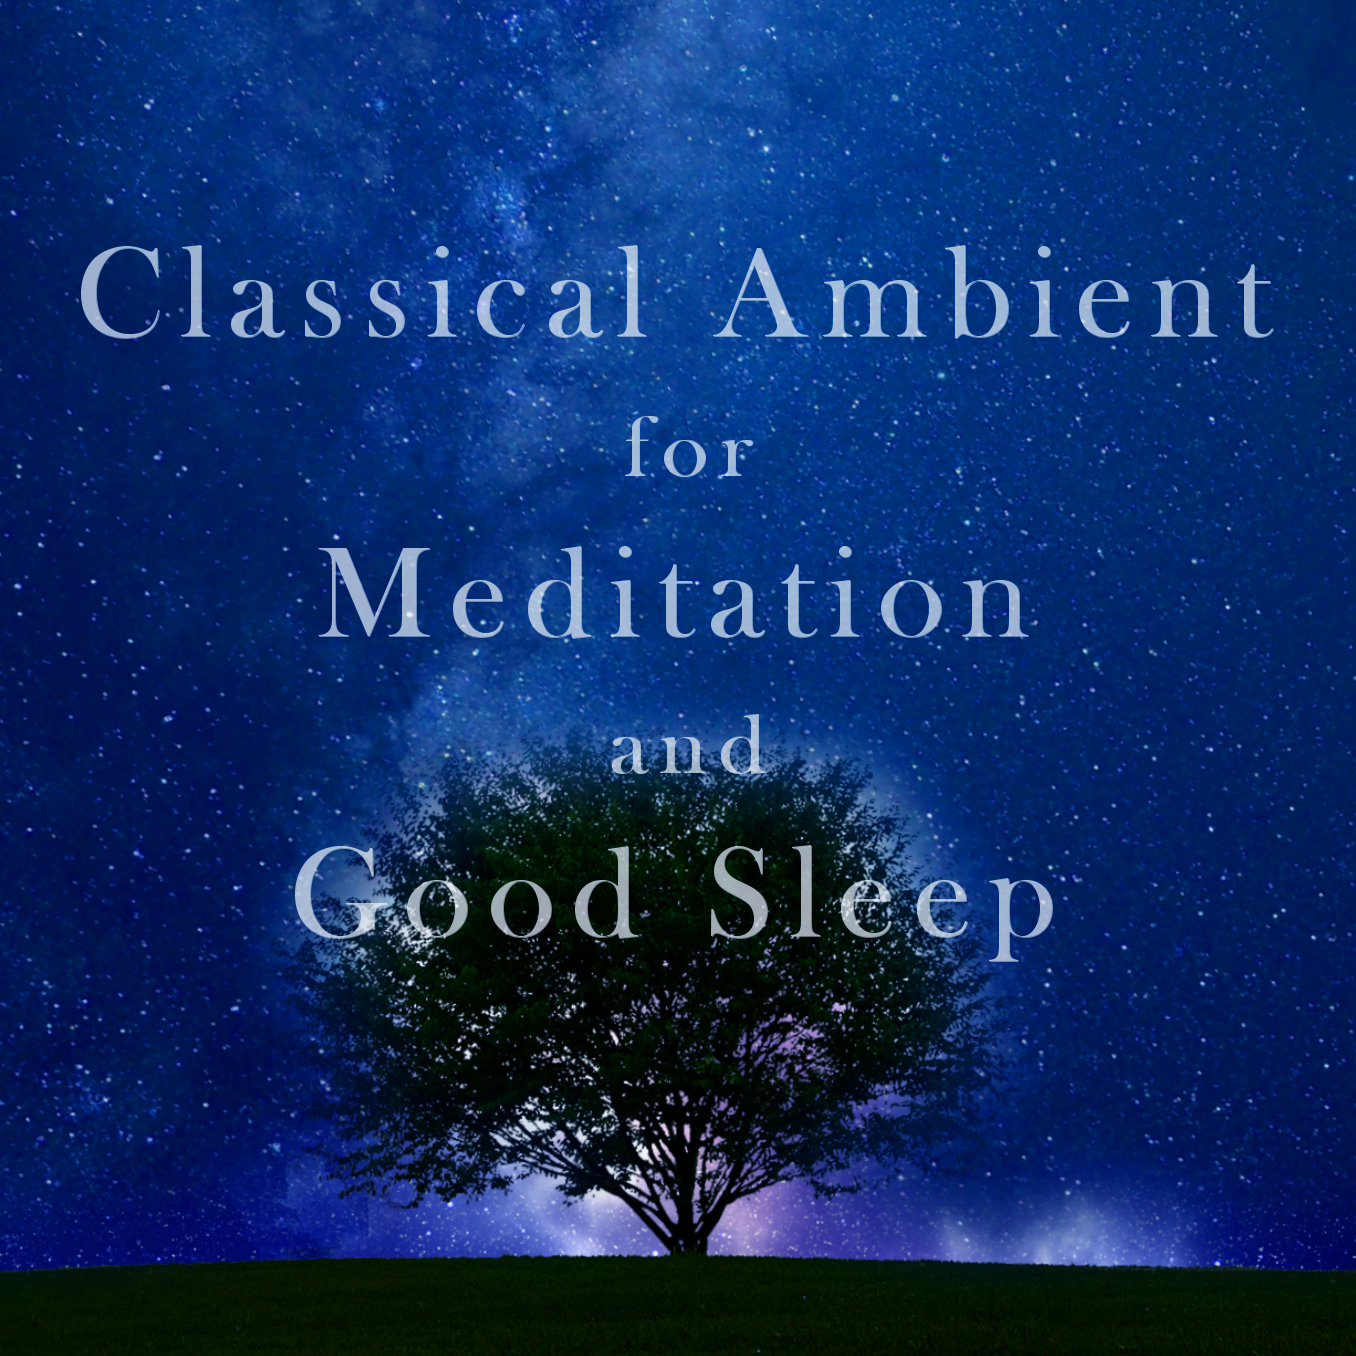 Classical Ambient for Meditation and Good Sleep_Alubum Art